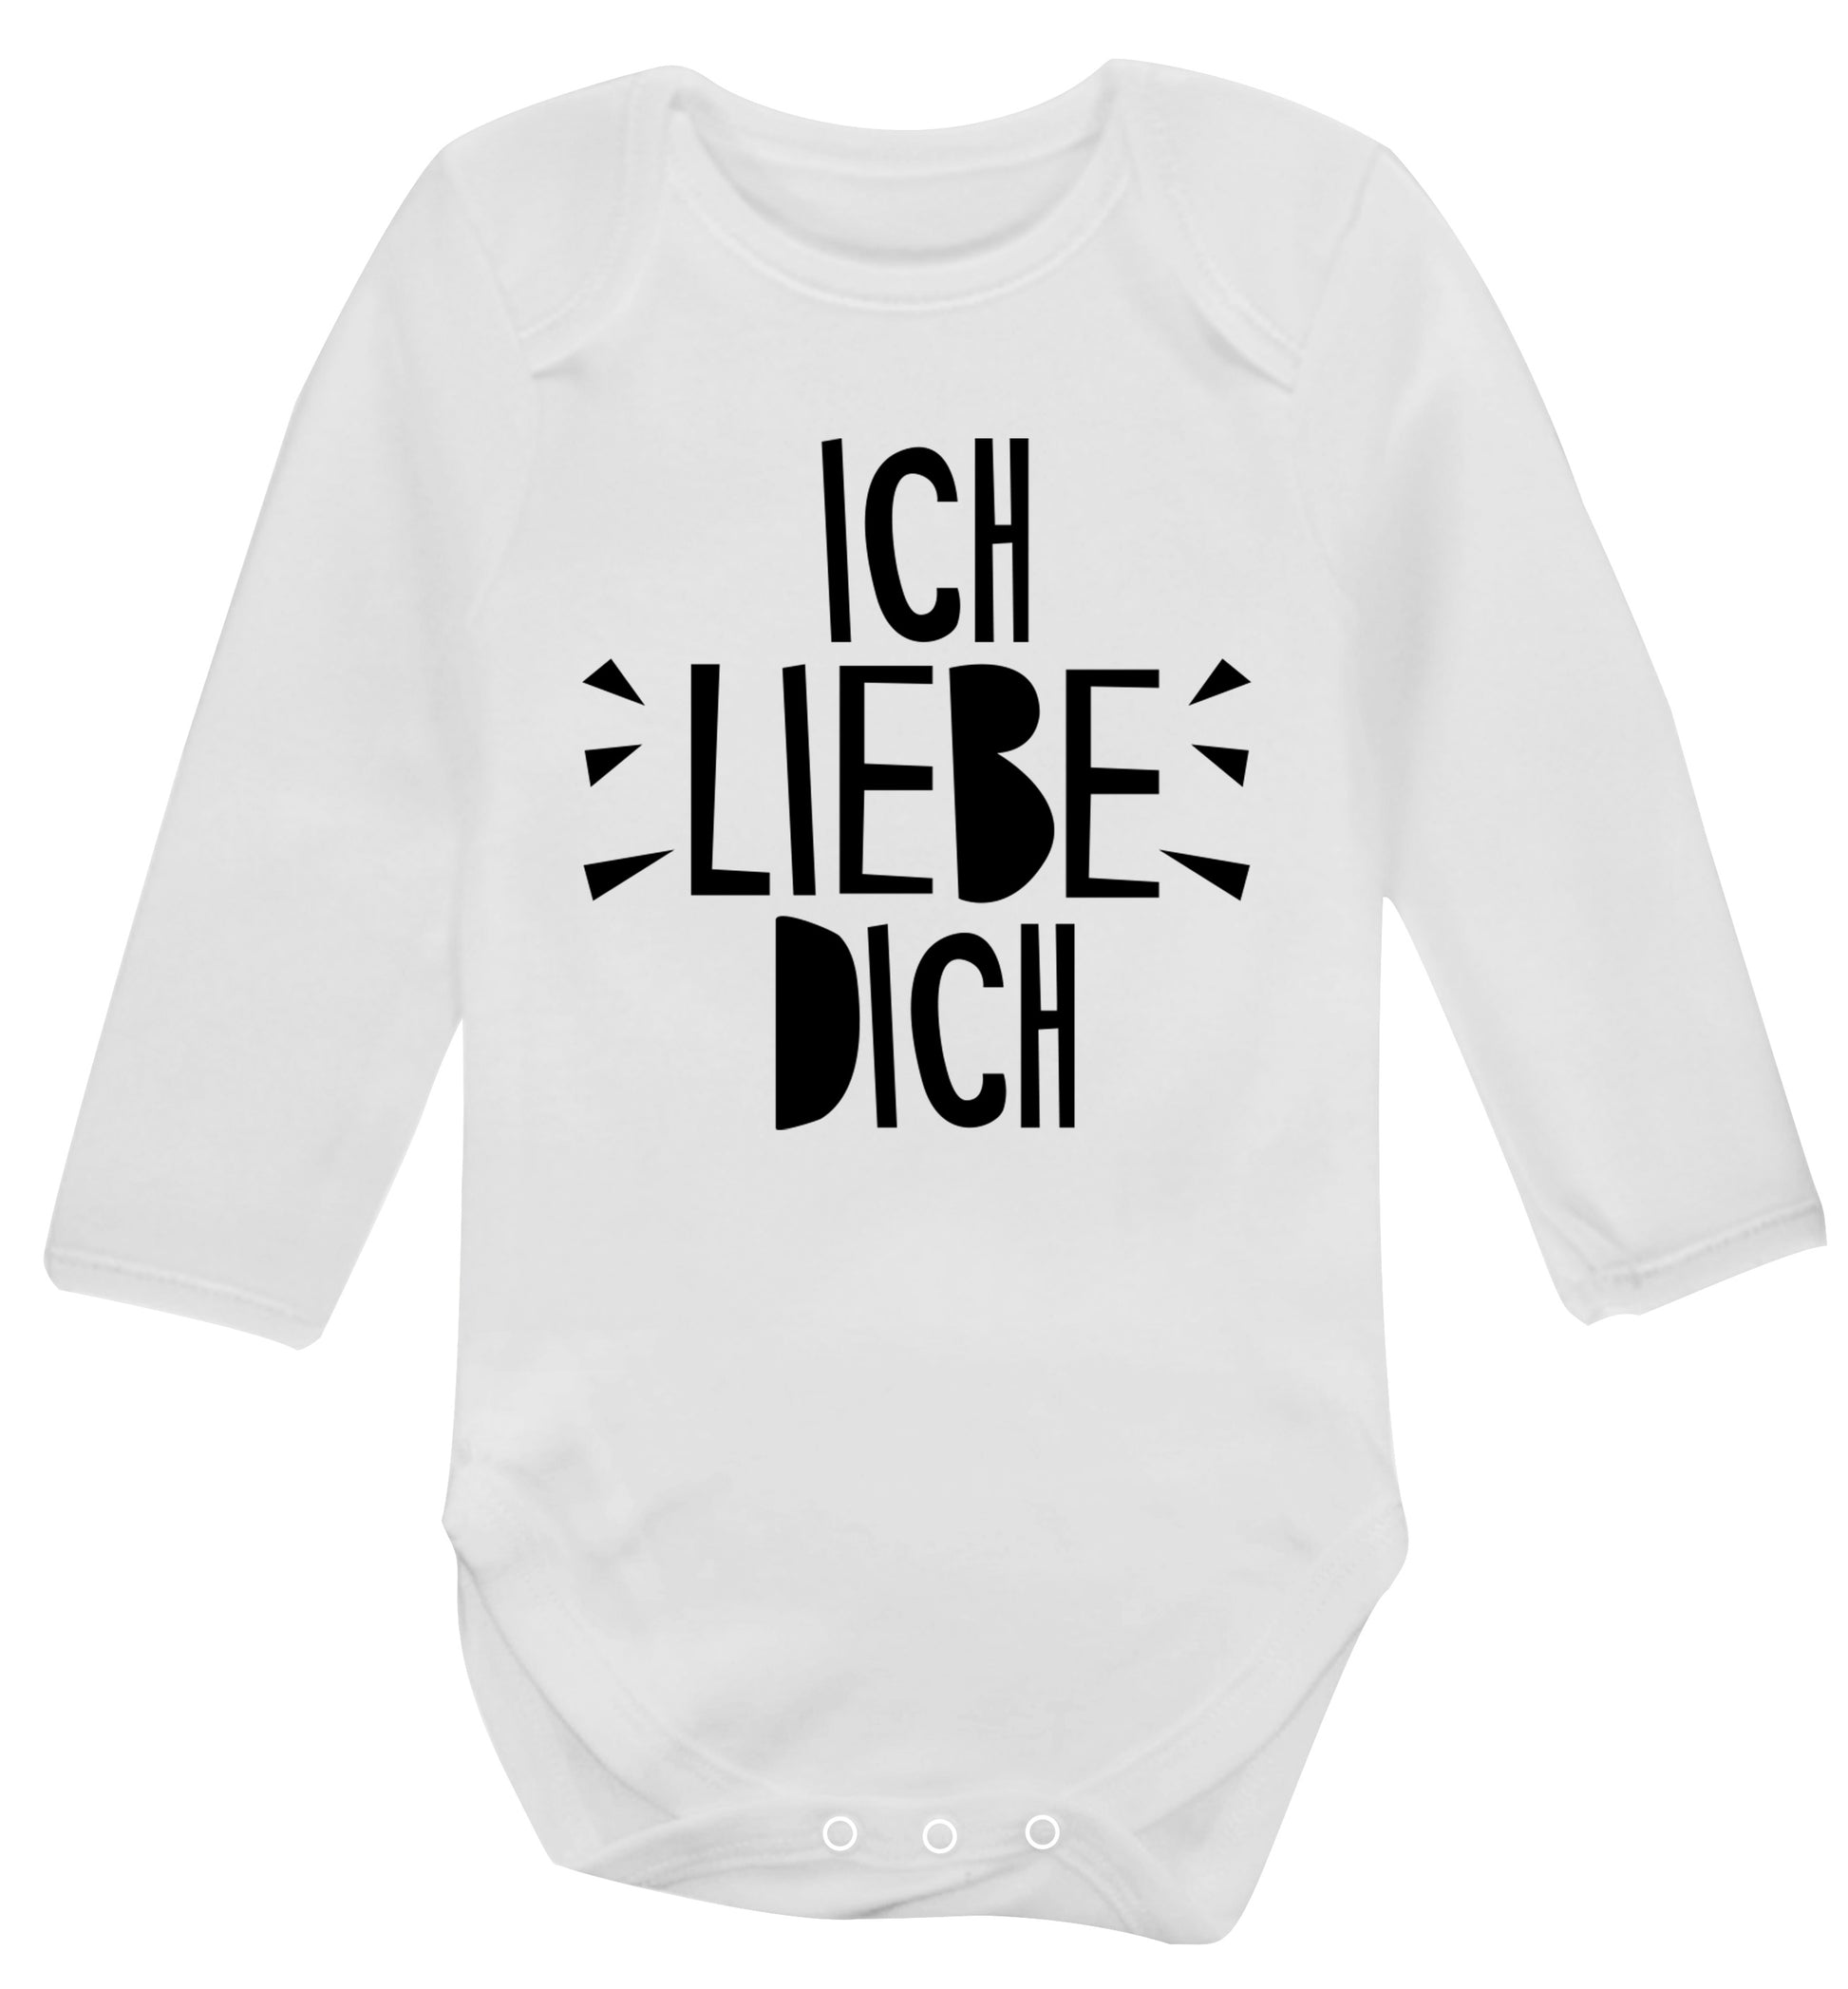 Ich liebe dich - I love you Baby Vest long sleeved white 6-12 months